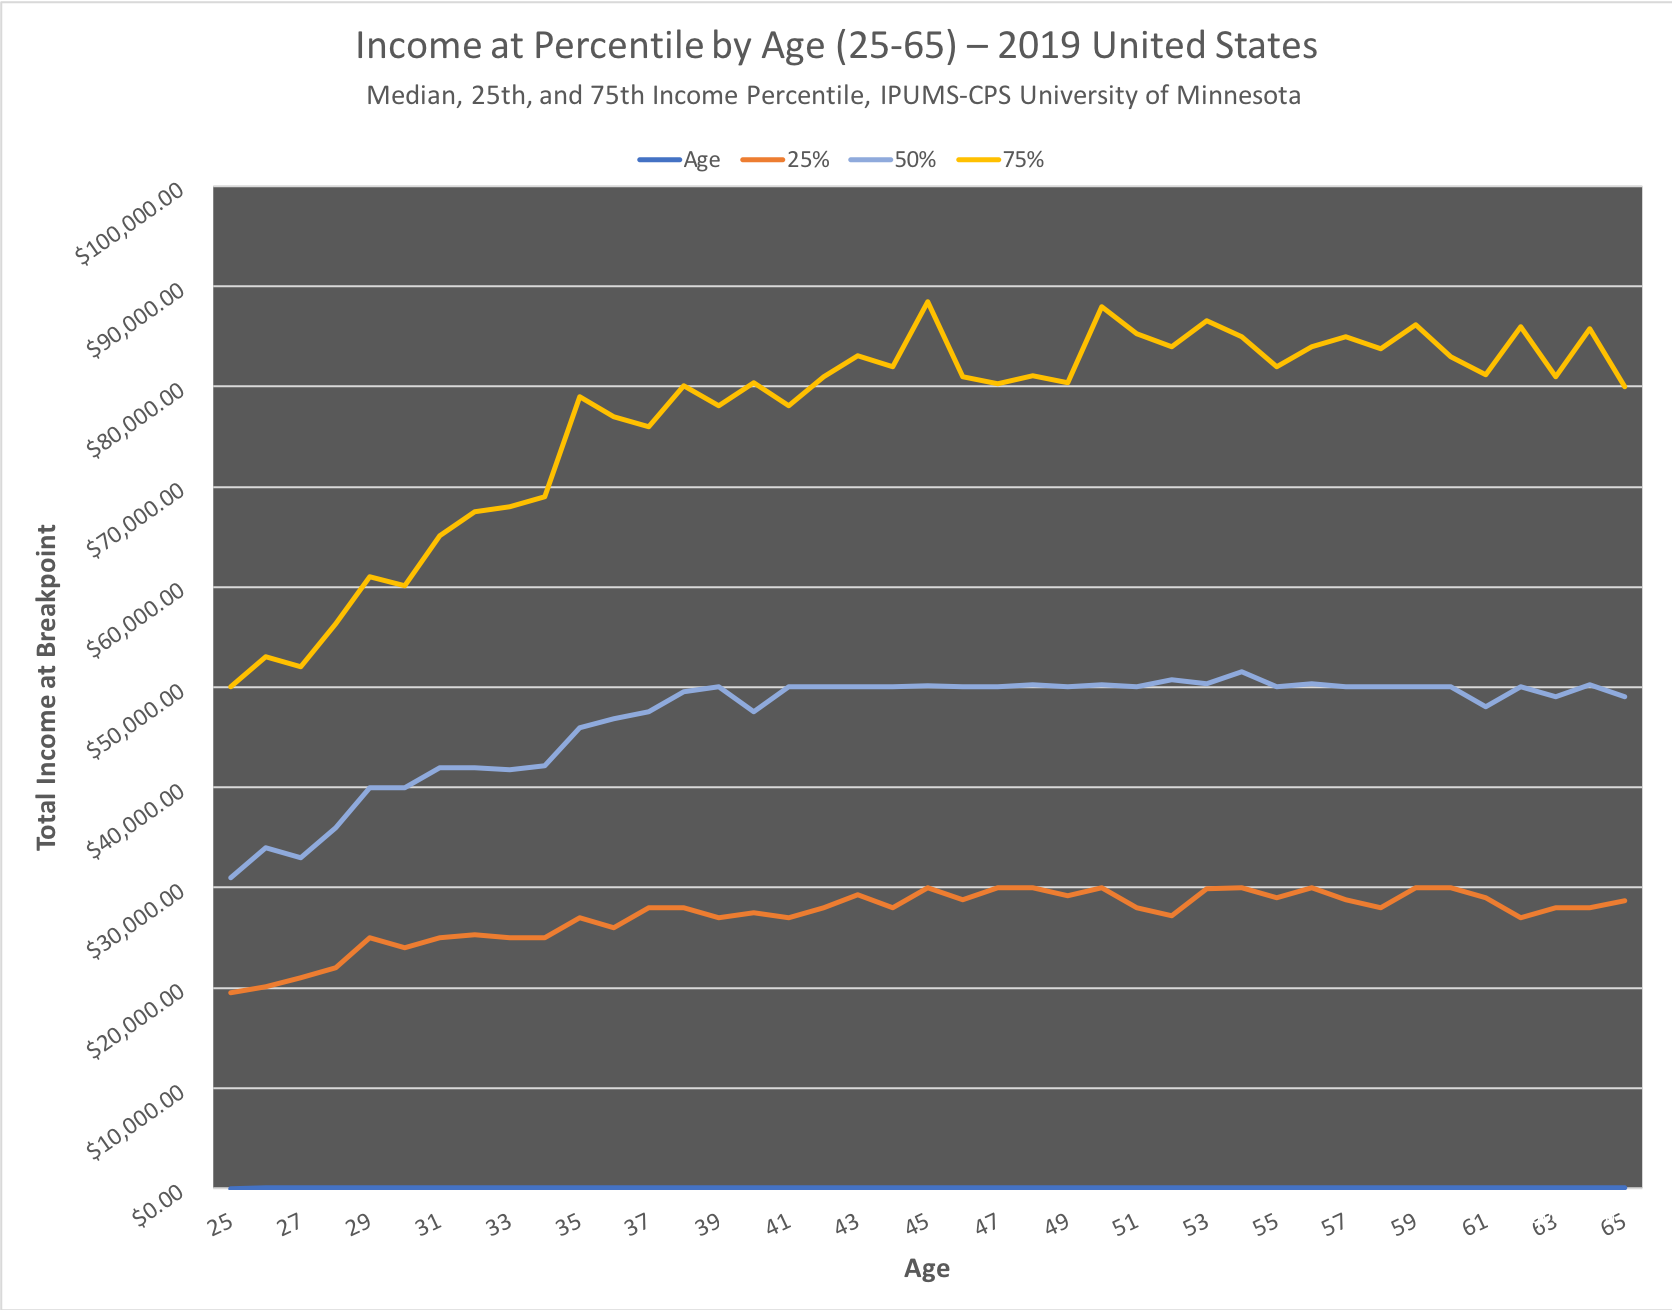 Median, 25th, and 75th percentile income in 2019 for age 25-65